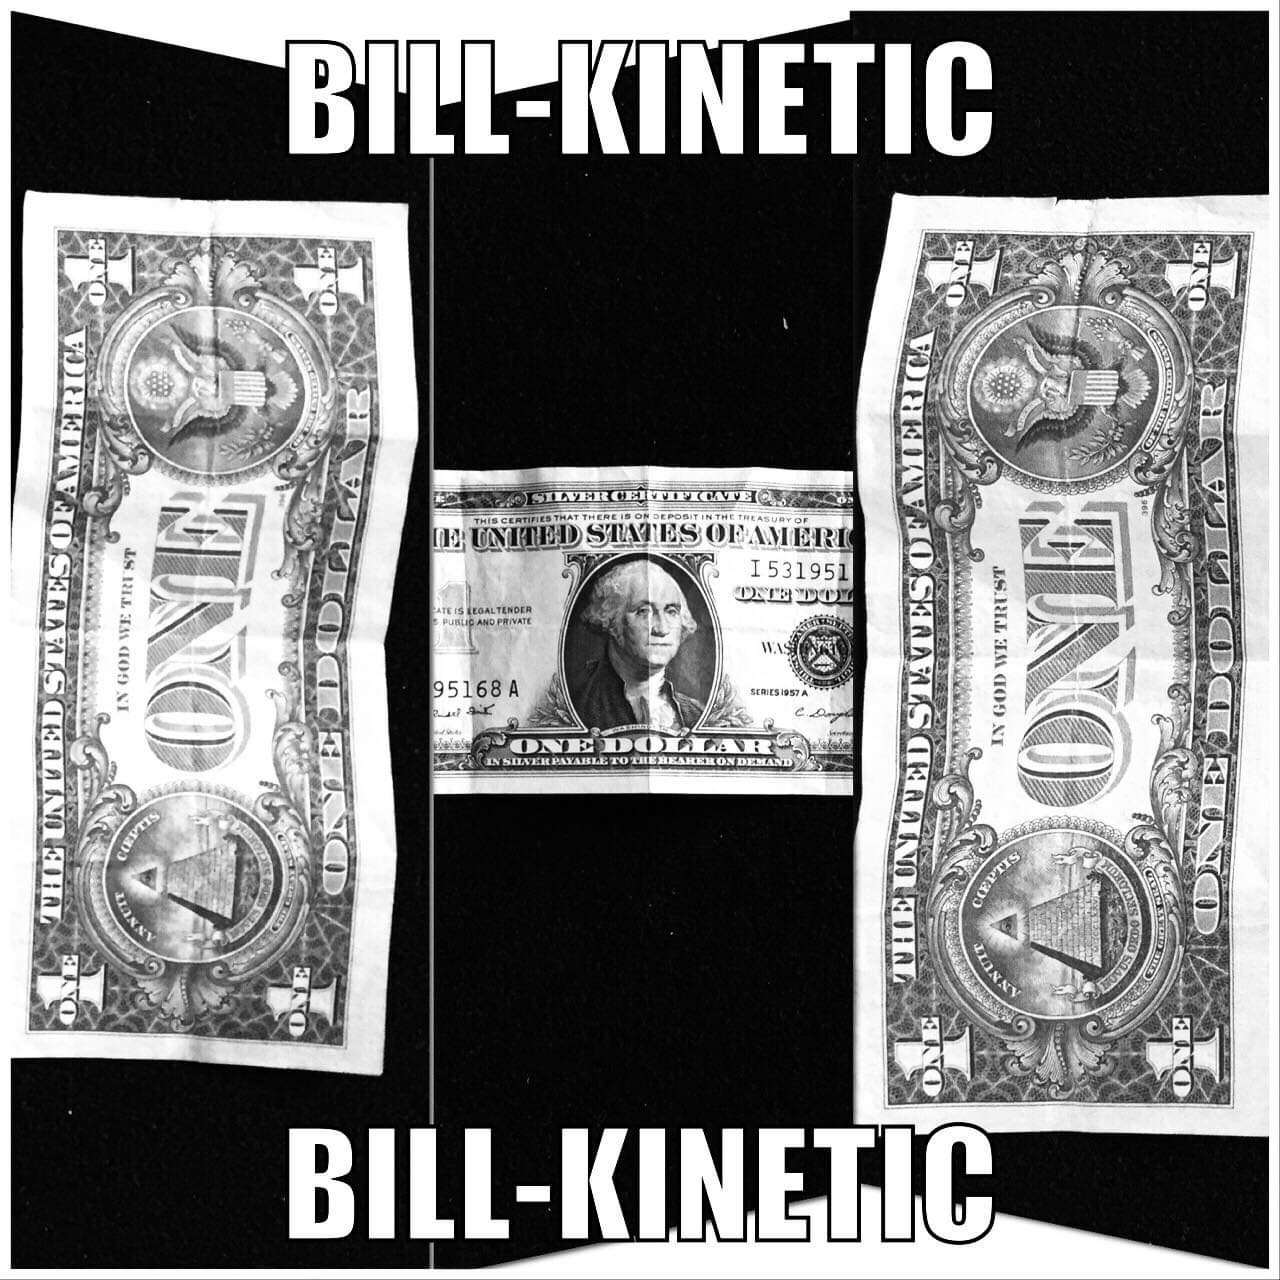 Bill Kinetic by Alfred Dockstader (MP4 Video Download)